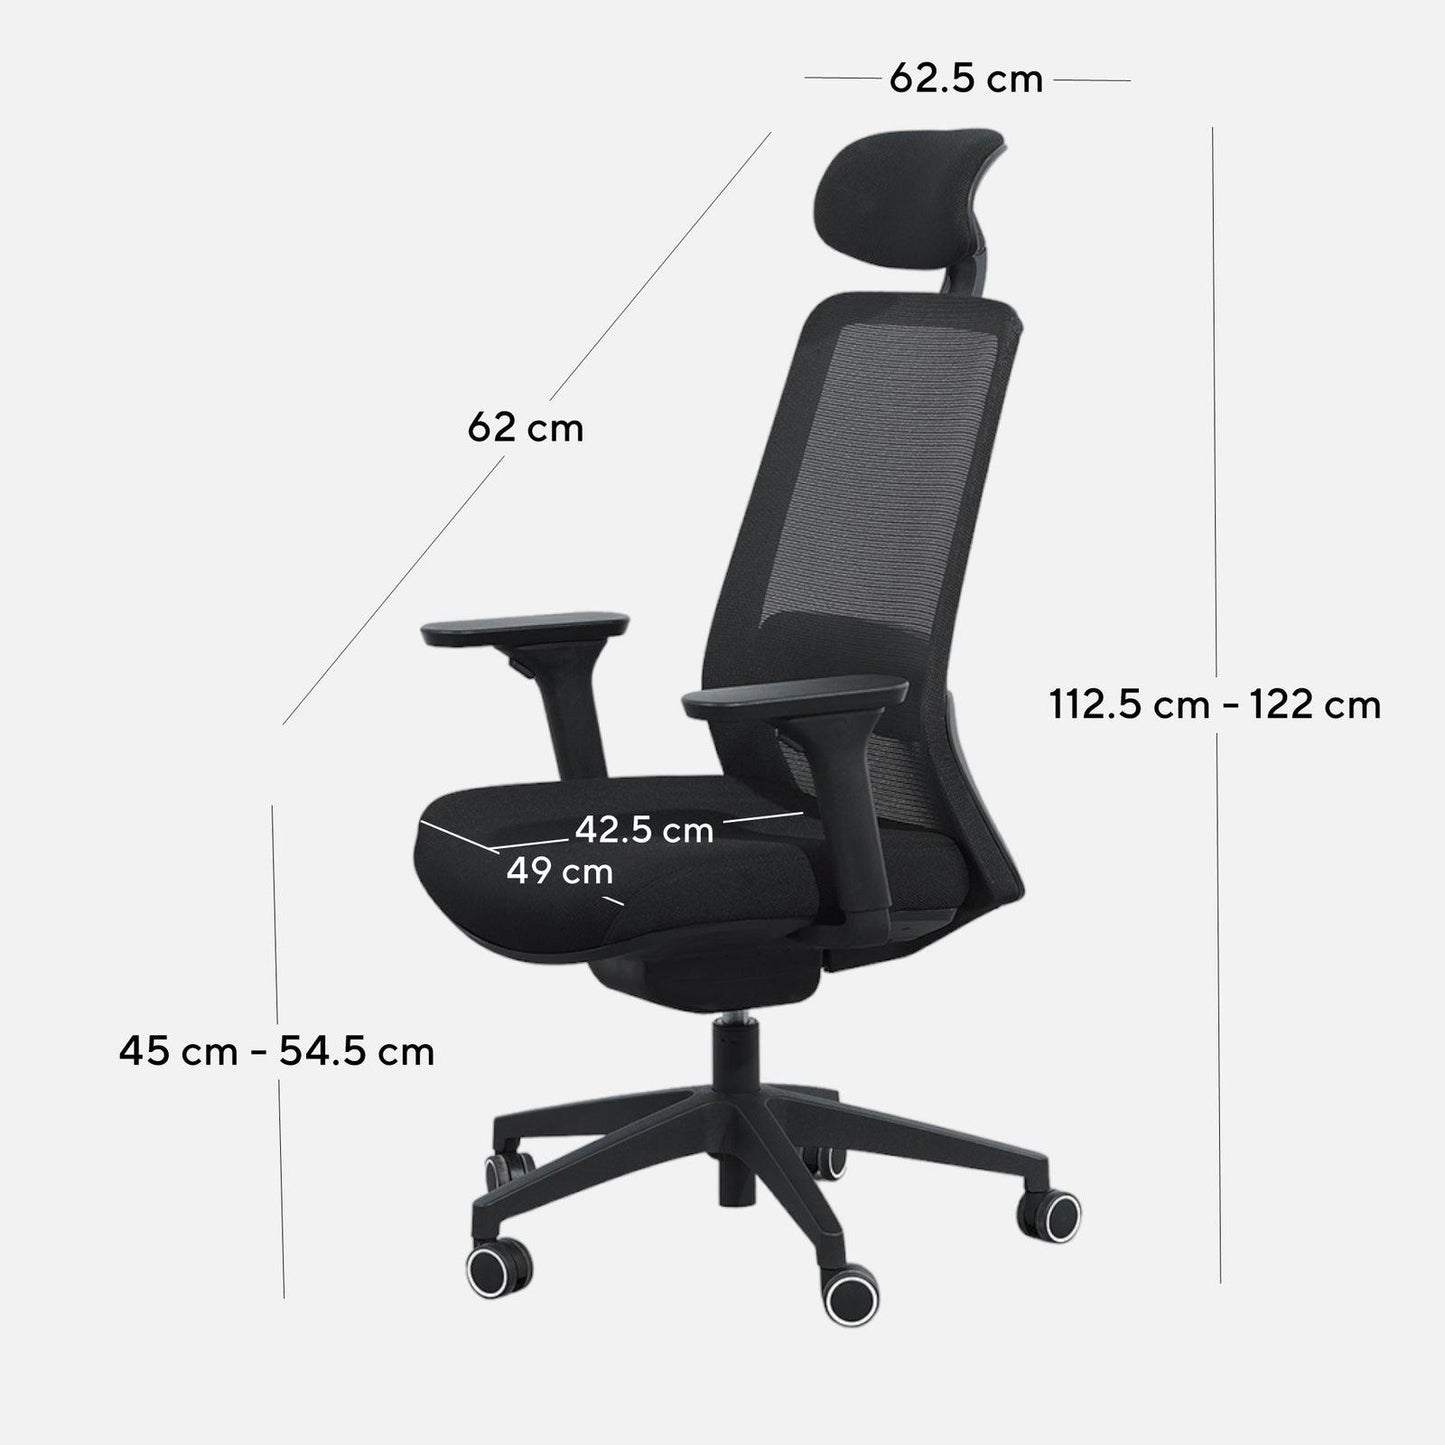 Mesh Office Chair - Full Black - Office/Gaming ChairsOC8504-LF 9